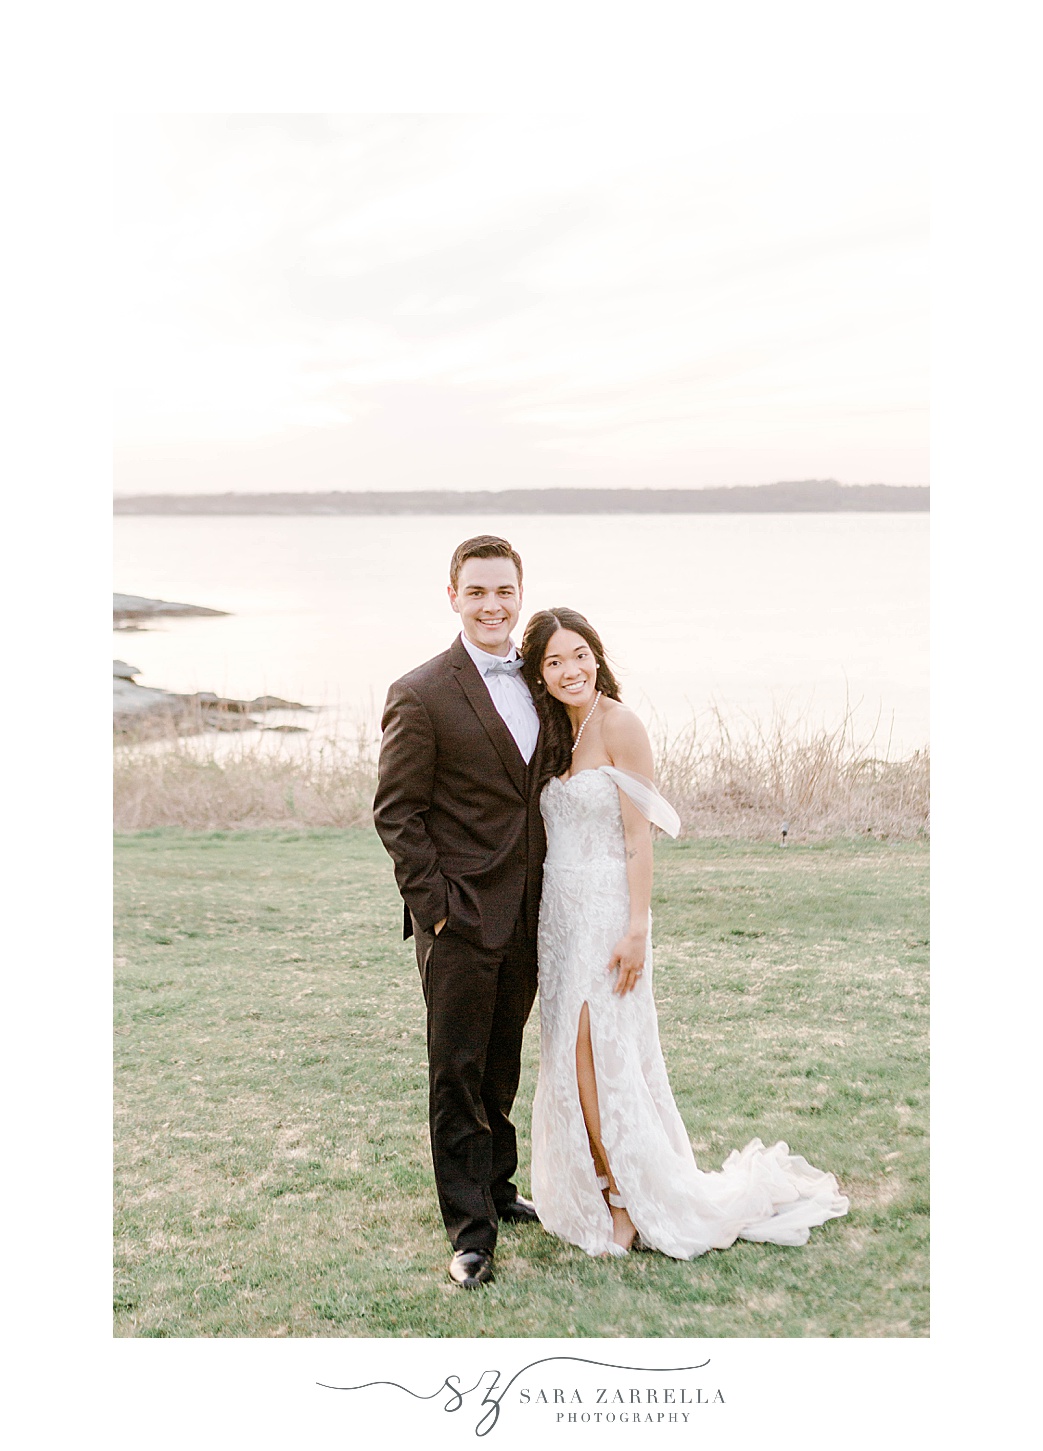 newlyweds stand together hugging on hill in Newport RI with water behind them